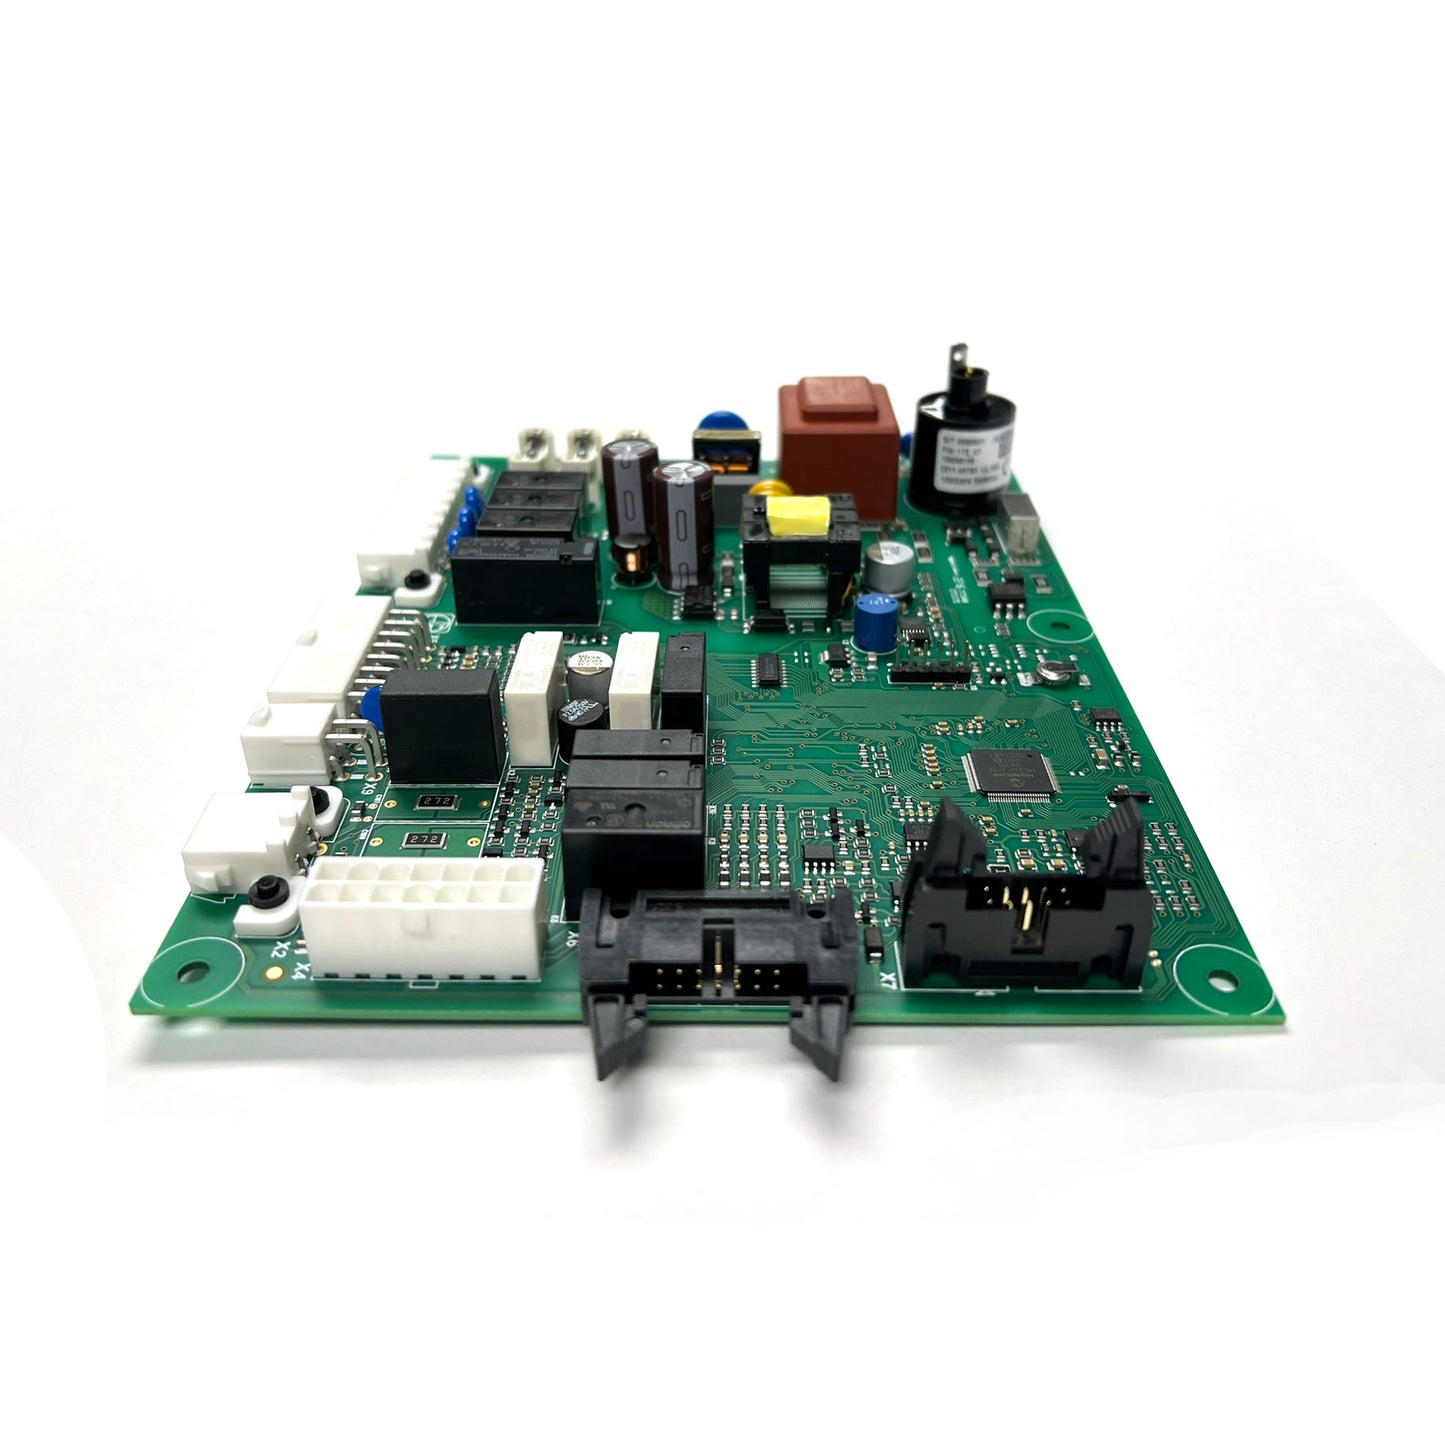 100167840 - High Altitude Integrated Control Board for Knight Boilers